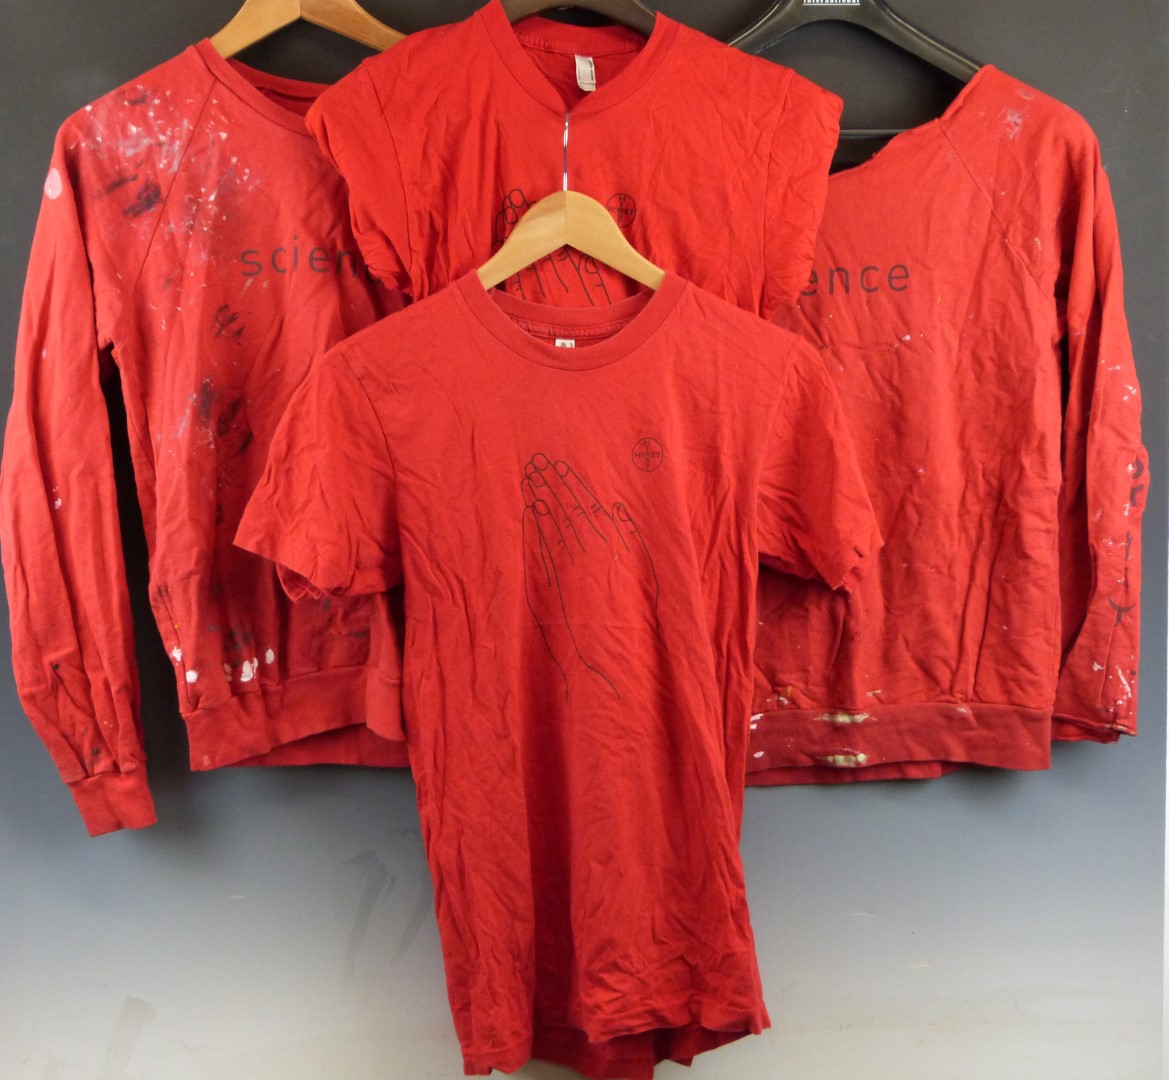 Four red Damien Hirst/ Science sweatshirts/ T-shirts with Hirst logos front and back, size S,